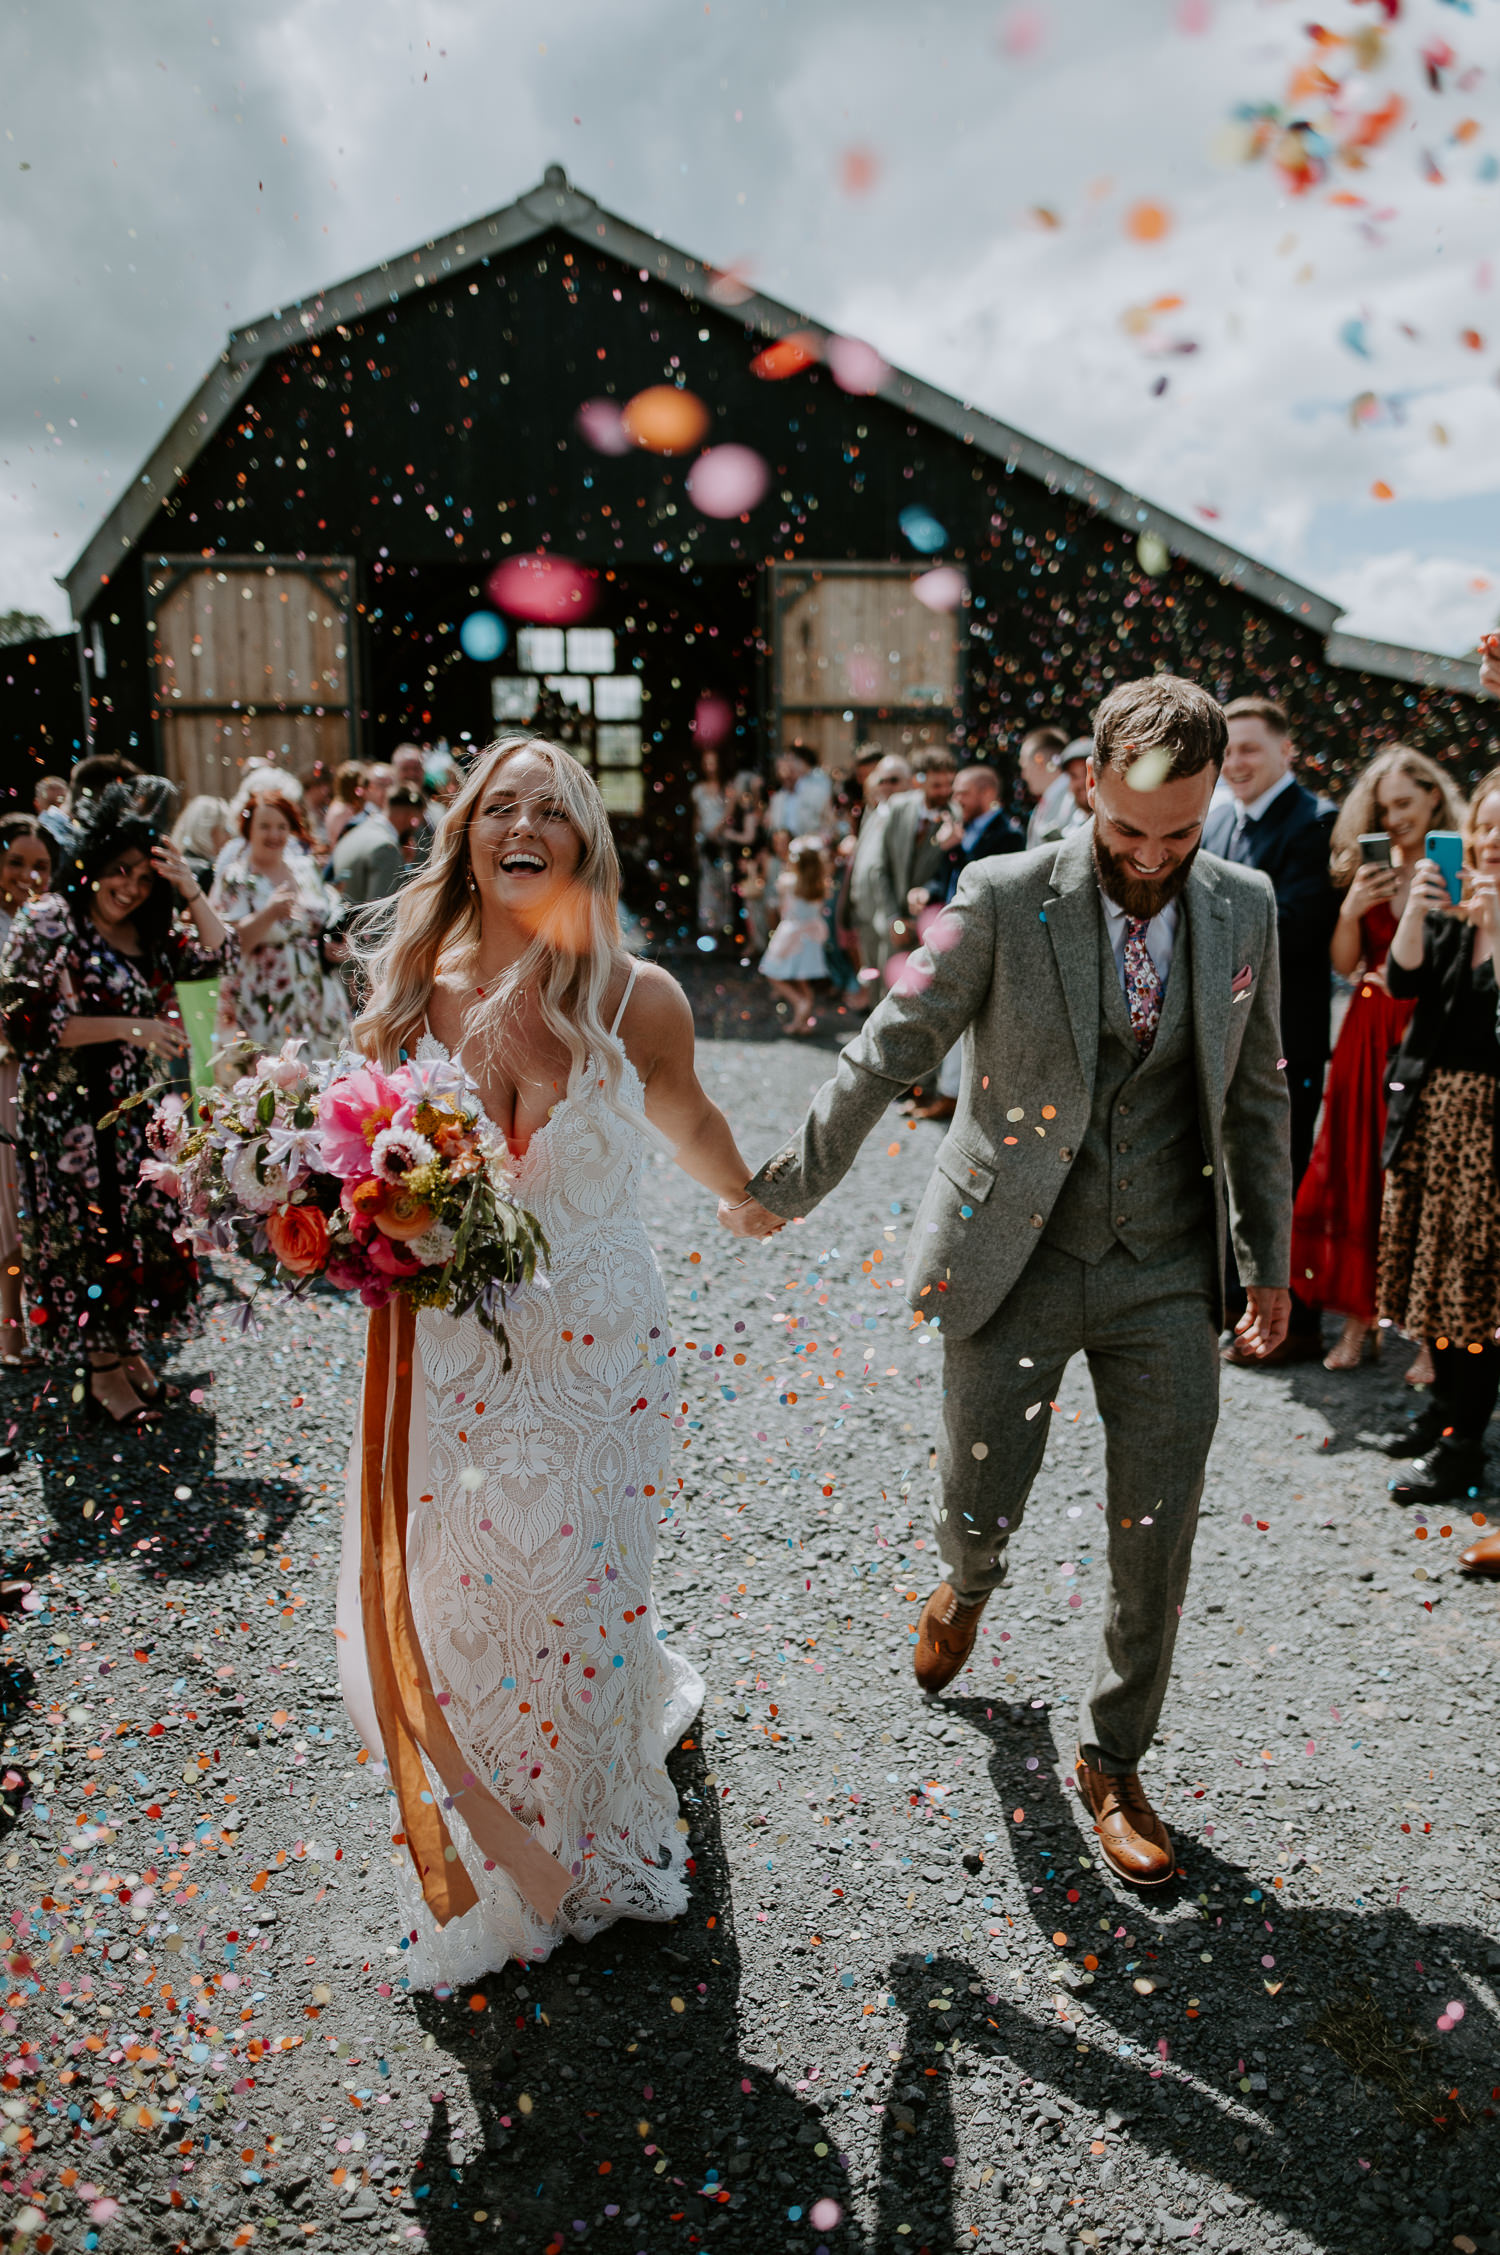 A couple exit the giraffe shed to a shower of colourful confetti.